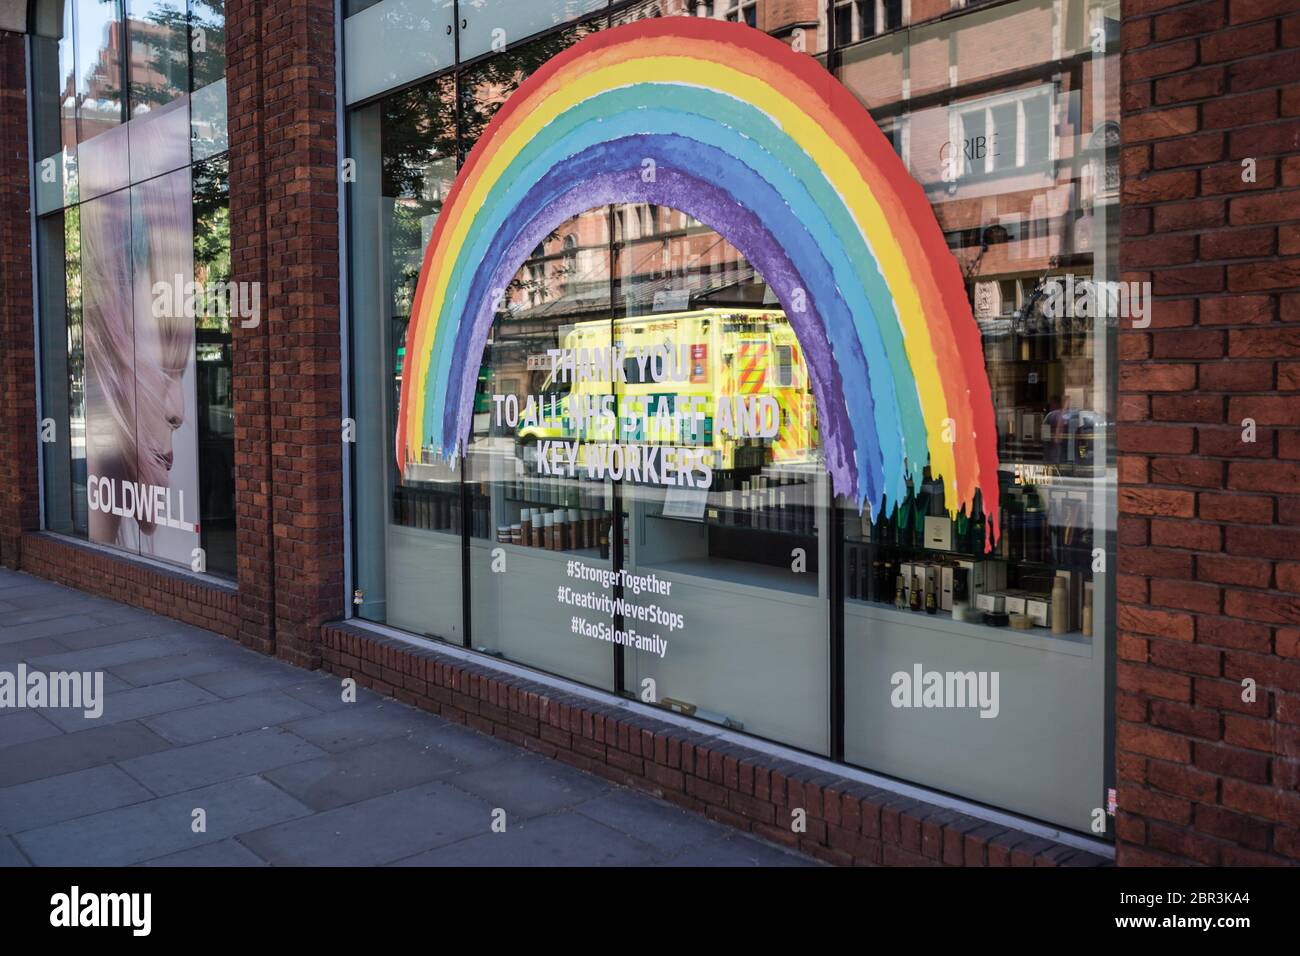 An ambulance passes by a rainbow in the window of a shop thanking the Key Workers in a deserted London during the coronavirus pandemic in UK. Stock Photo